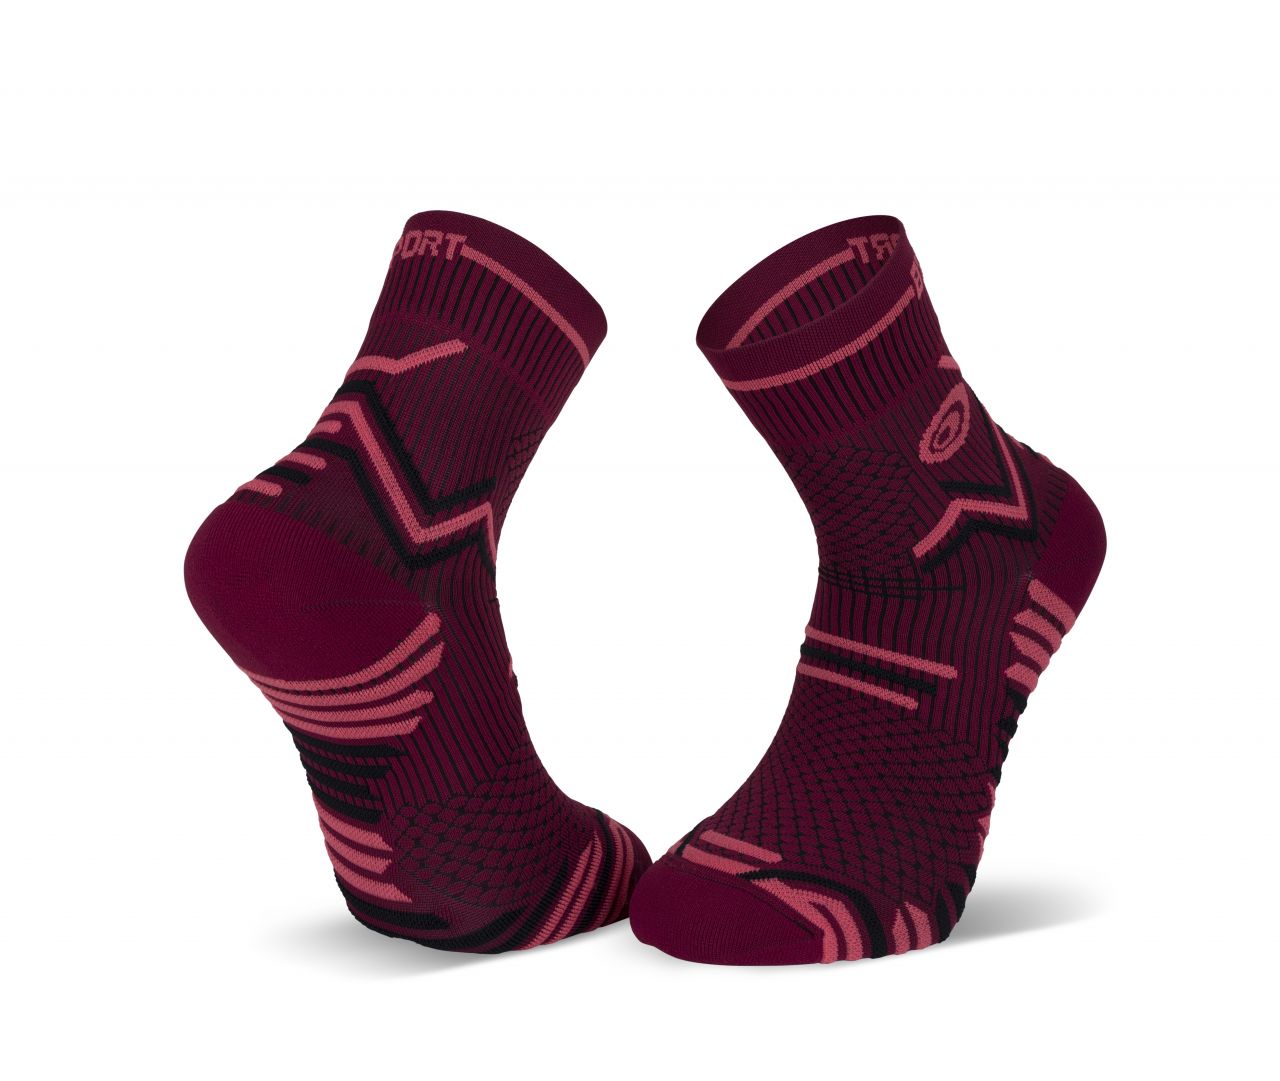 BV SPORT CHAUSSETTES ULTRA TRAIL BORDEAUX ET ROSE Made in France